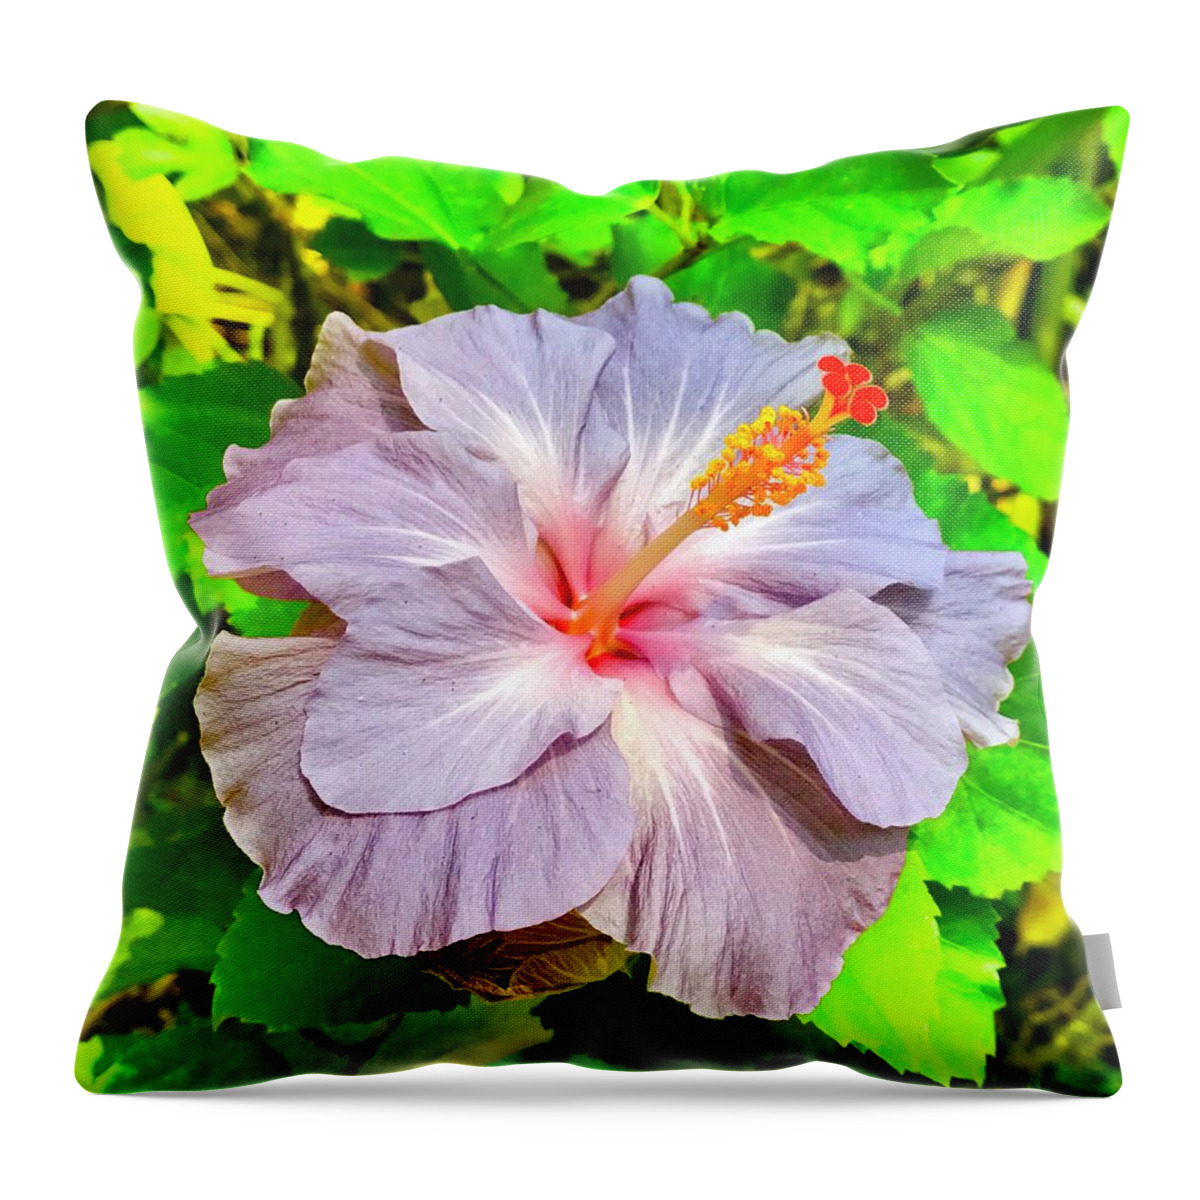 Hibiscus Adele 1 Flowers Of Aloha Lavender Throw Pillow featuring the photograph Hibiscus Adele 1 by Joalene Young